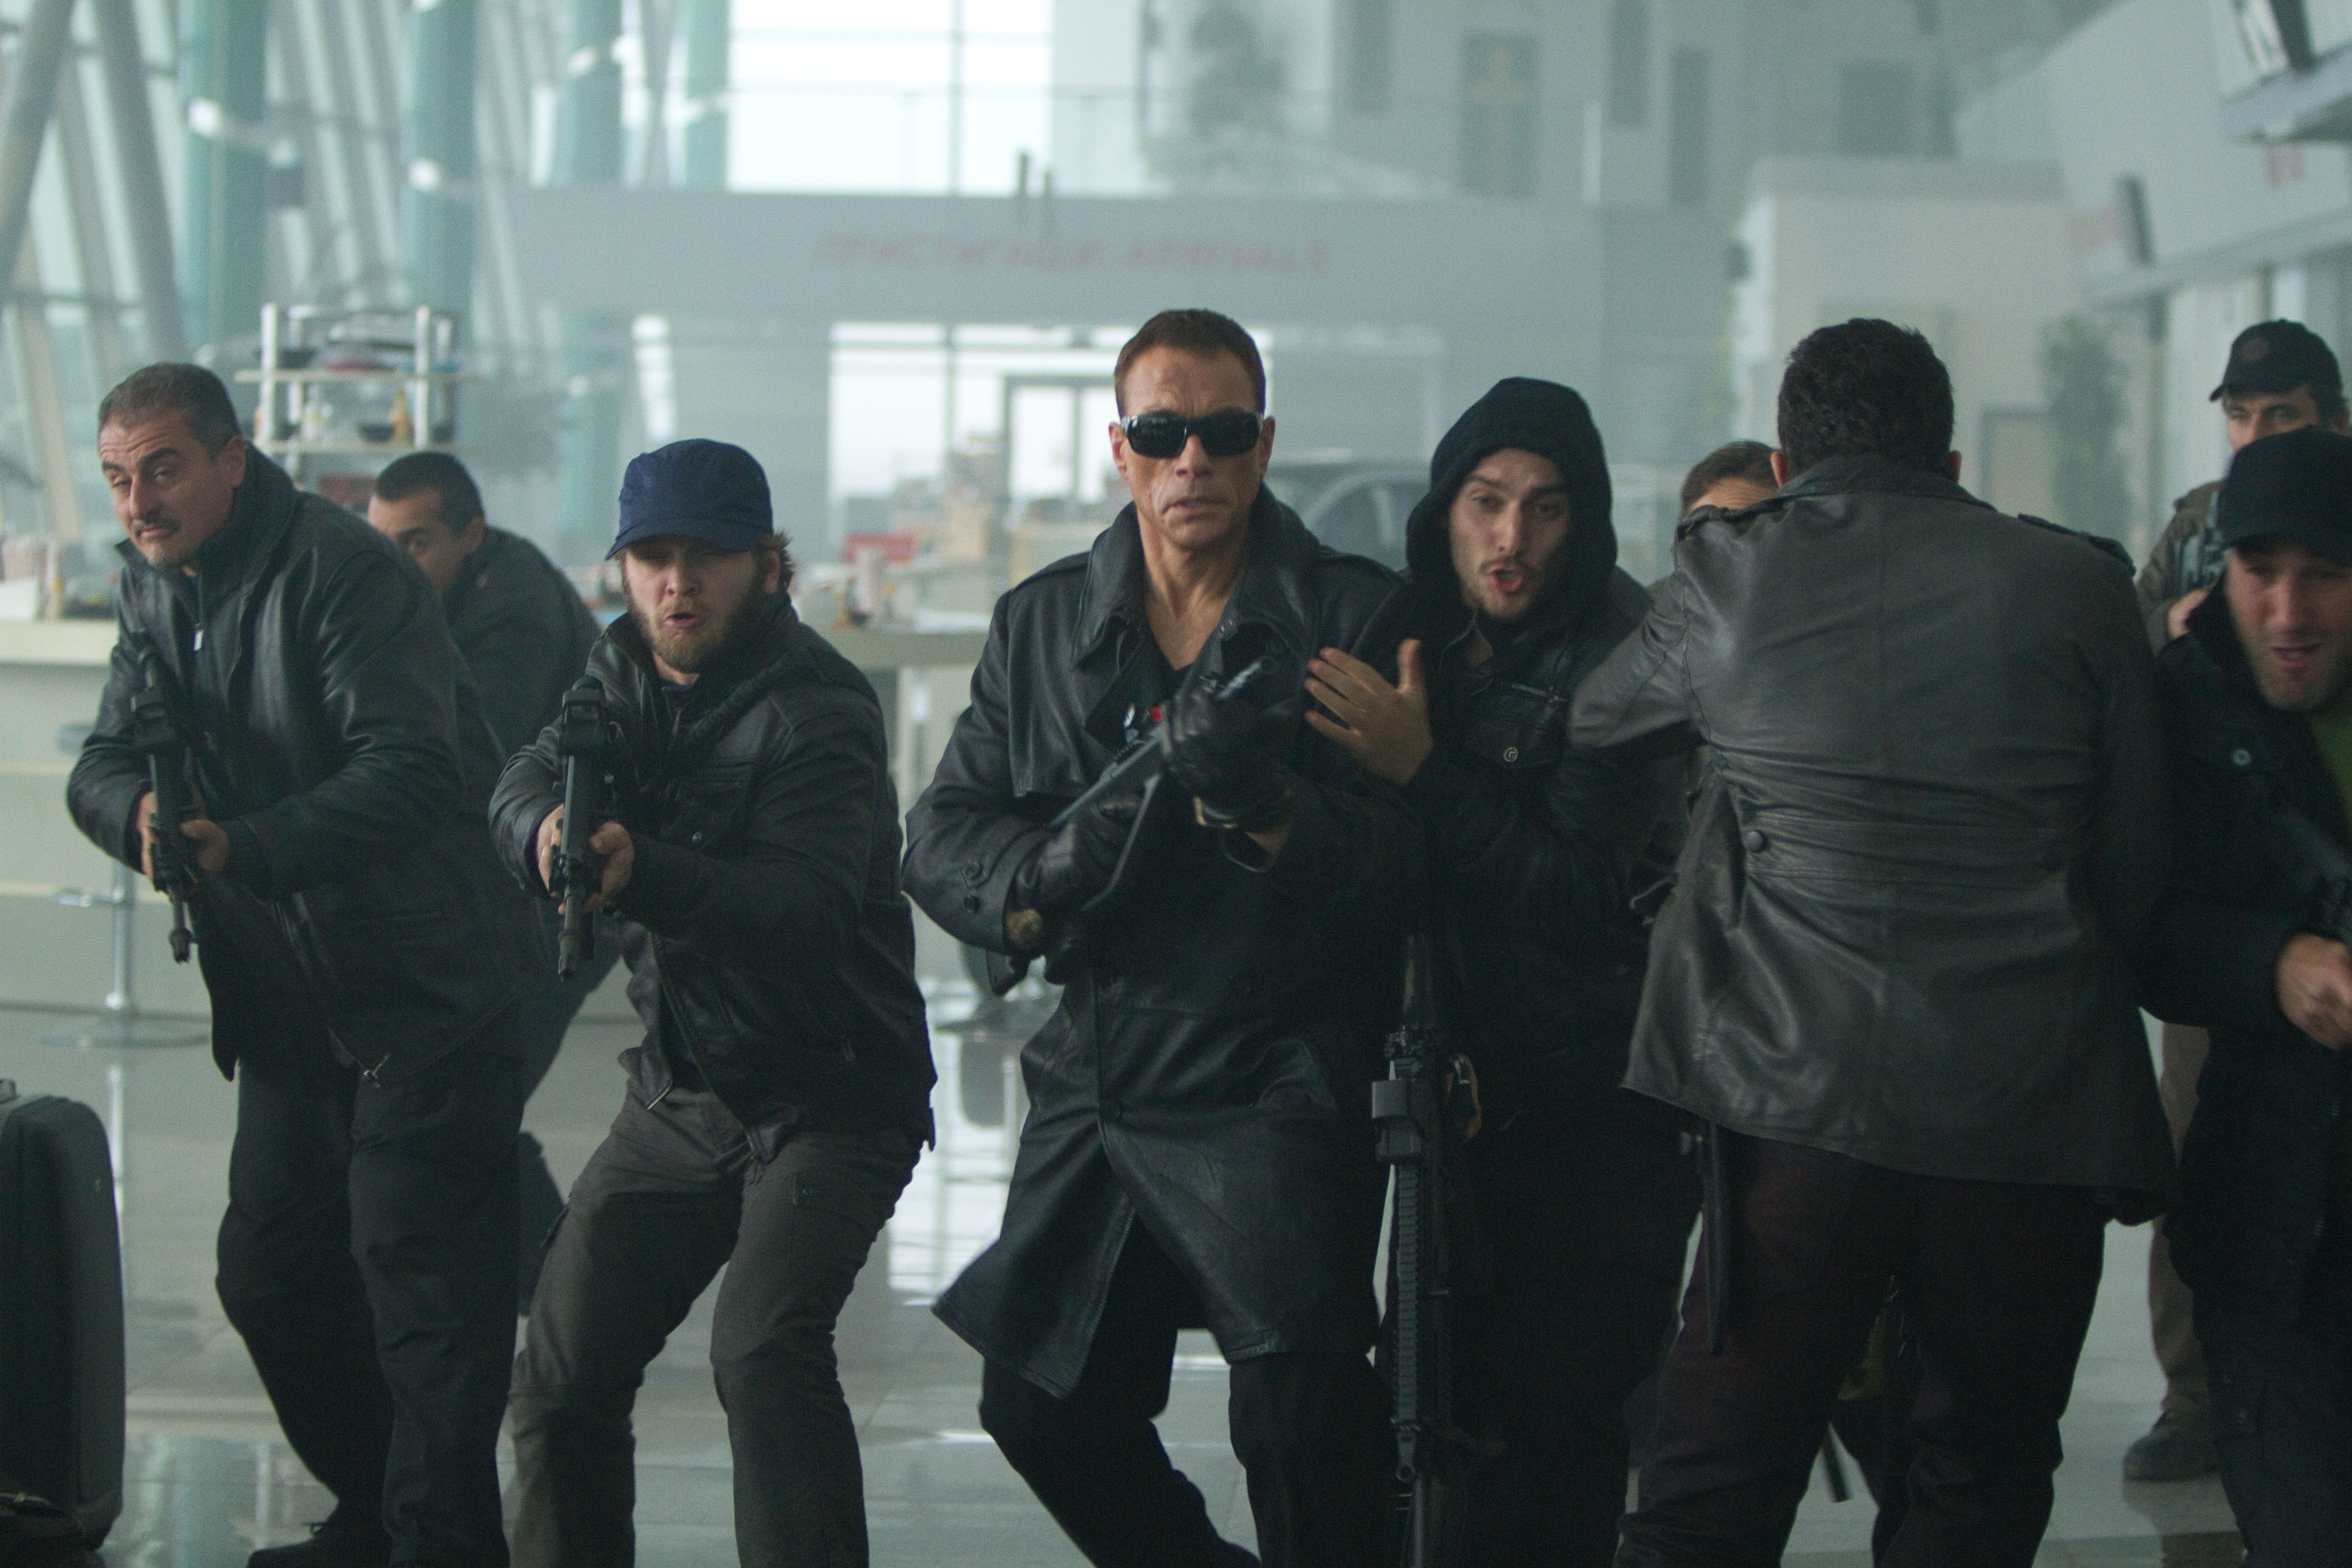 movie, the expendables 2, jean claude van damme, vilain (the expendables), the expendables